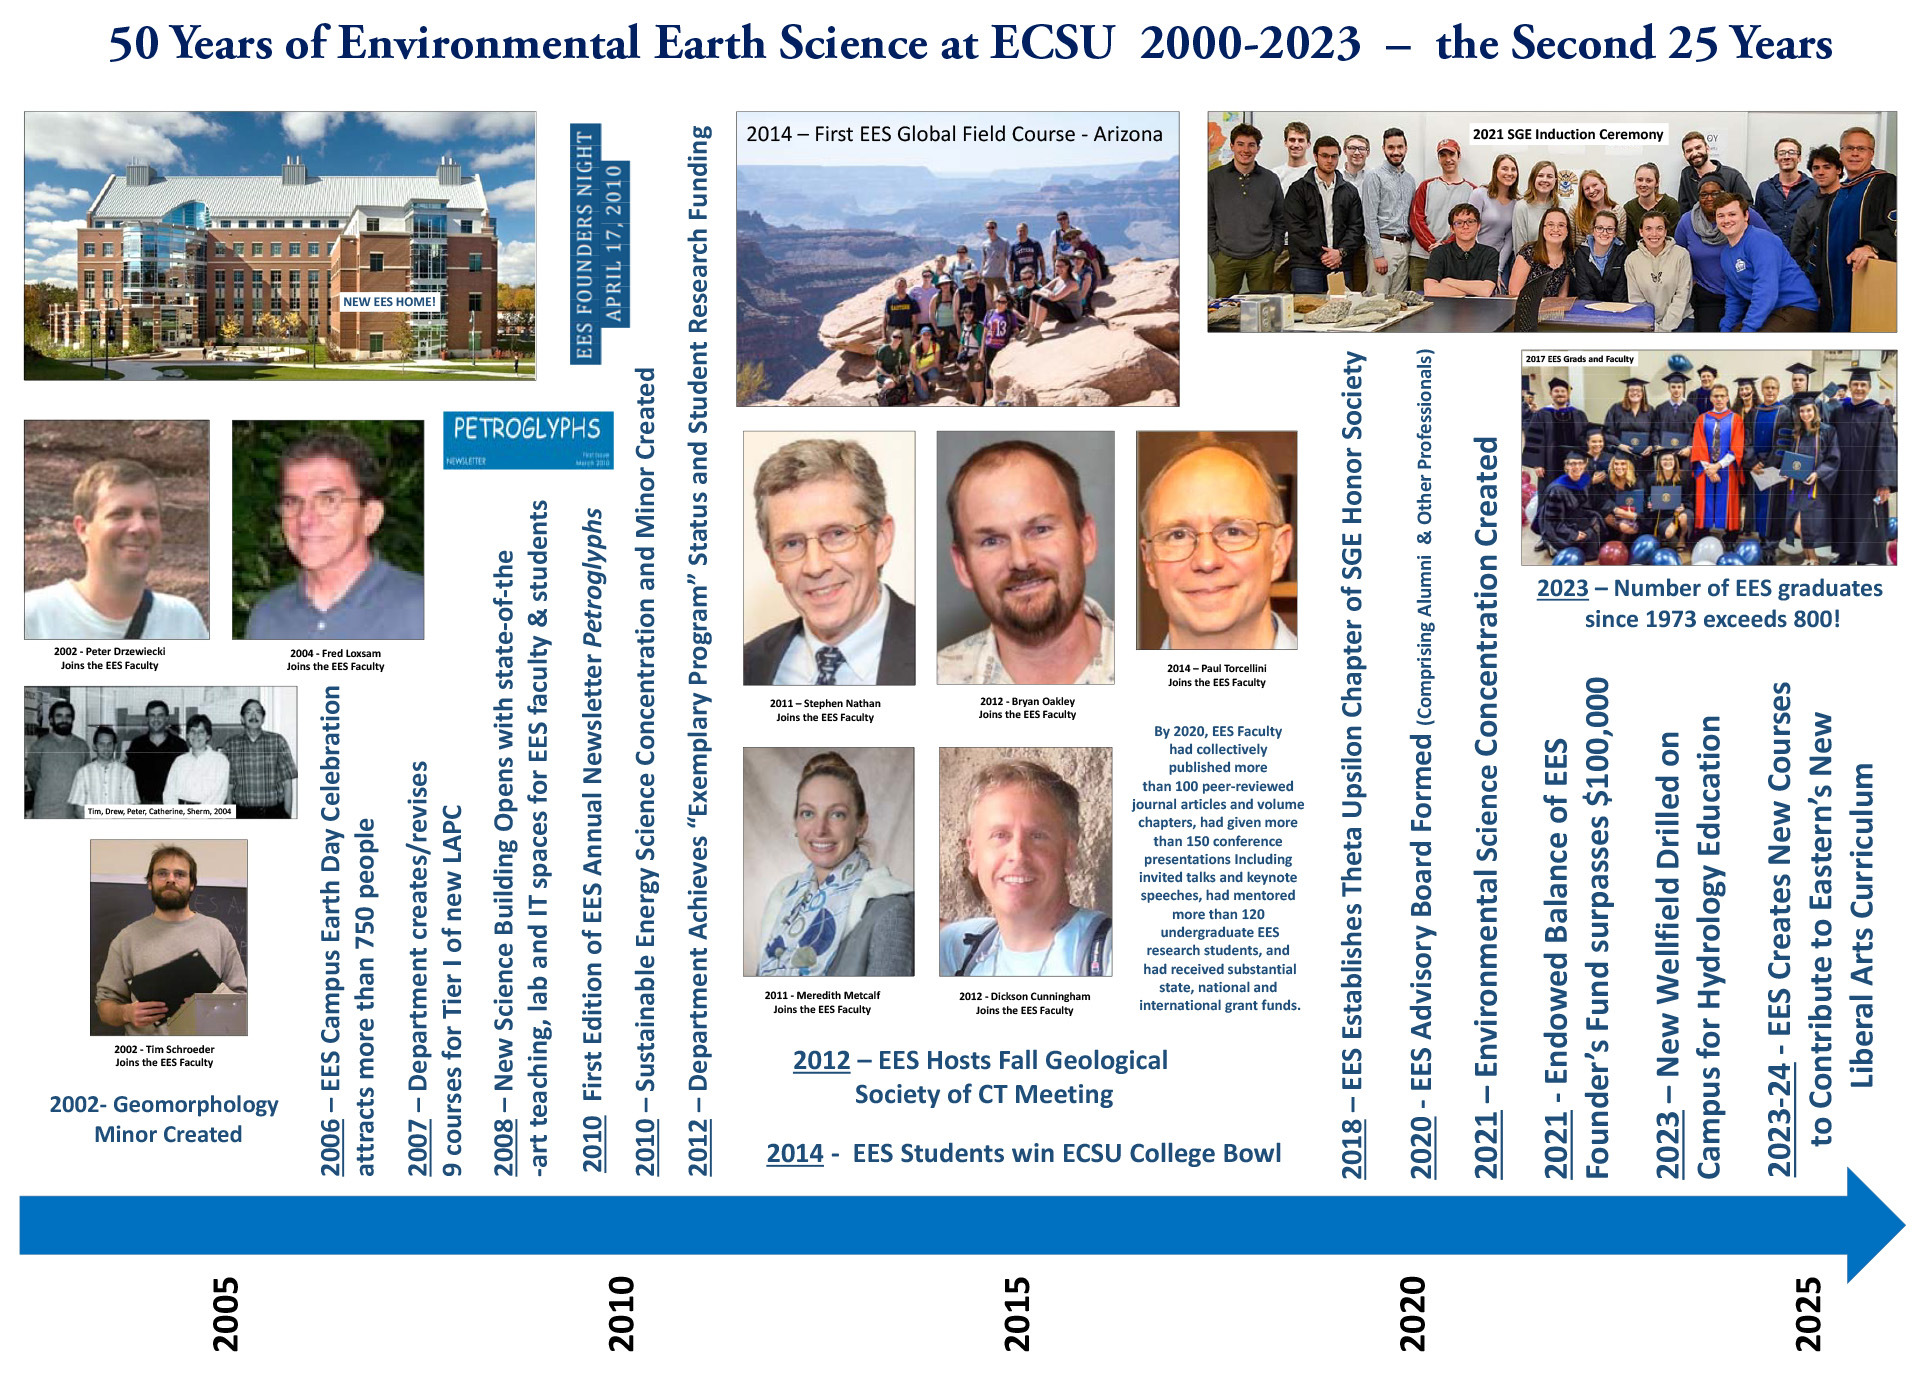 50 Years of Environmental Earth Science at ECSU 2000-2023 – the Second 25 Years